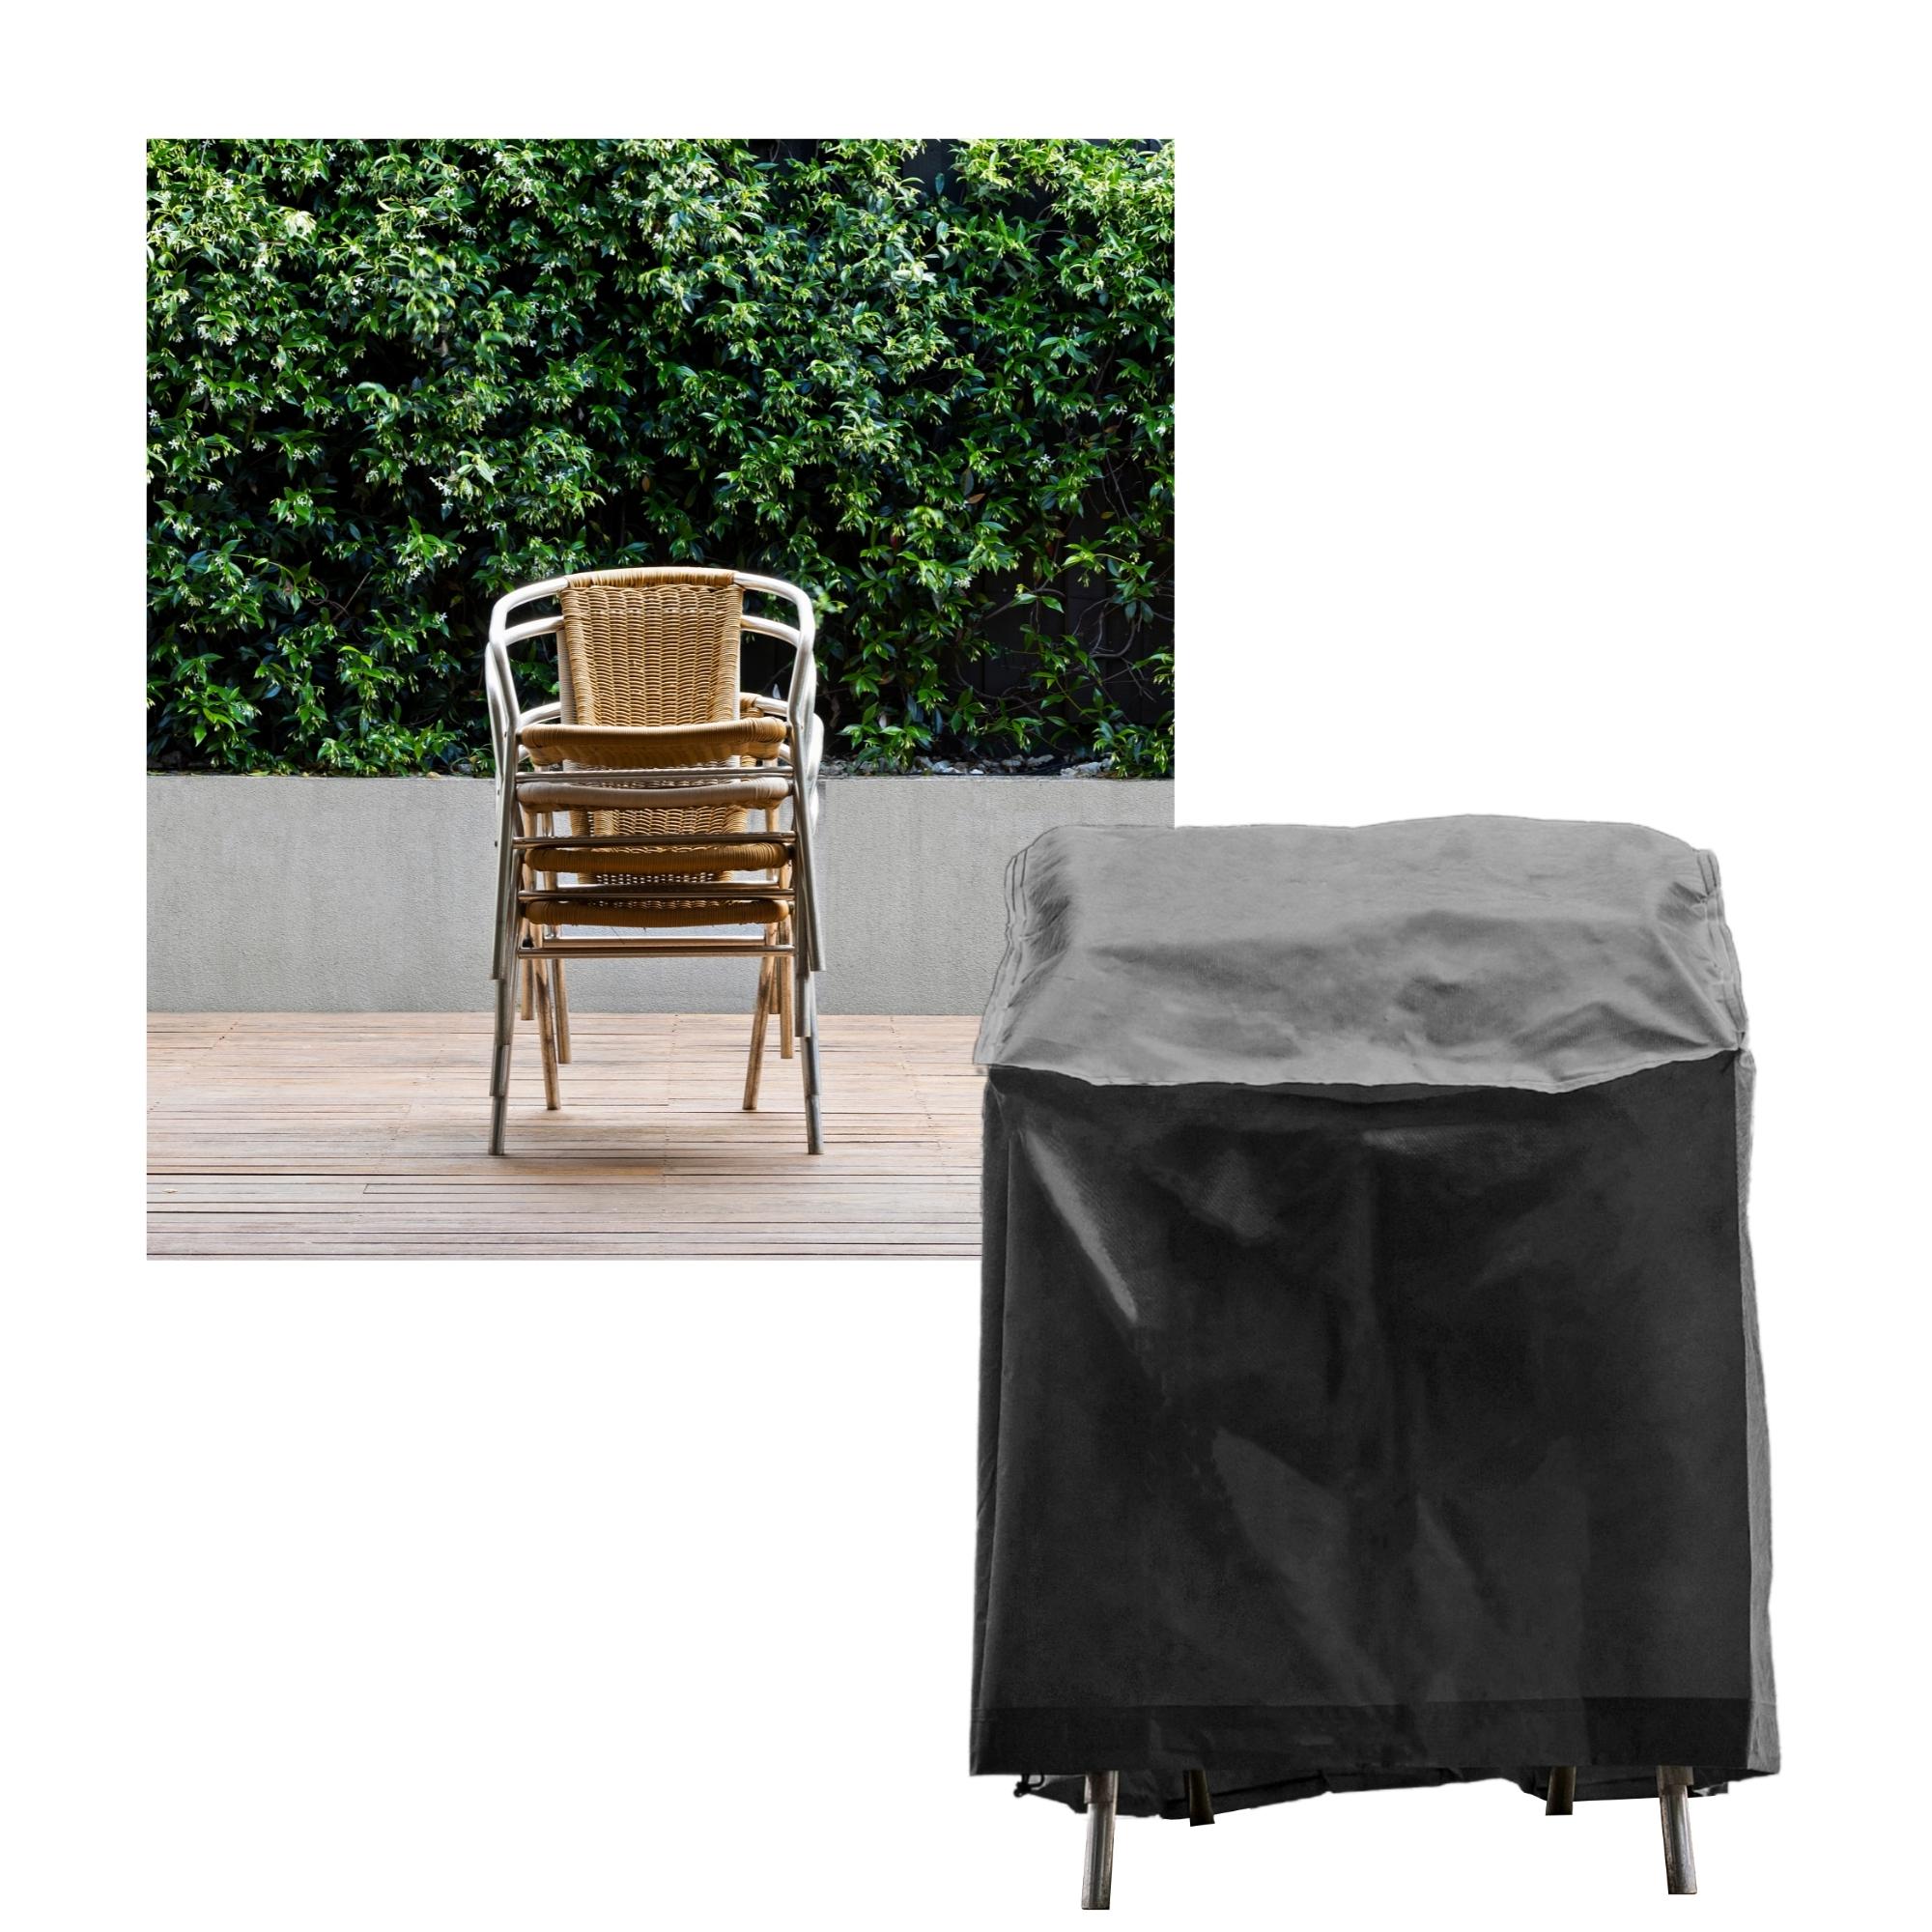 willstar High-Back Chair Cover Waterproof Outdoor Deep Seat Cover Patio Furniture Cover 31 L x 35 W x 38 H 